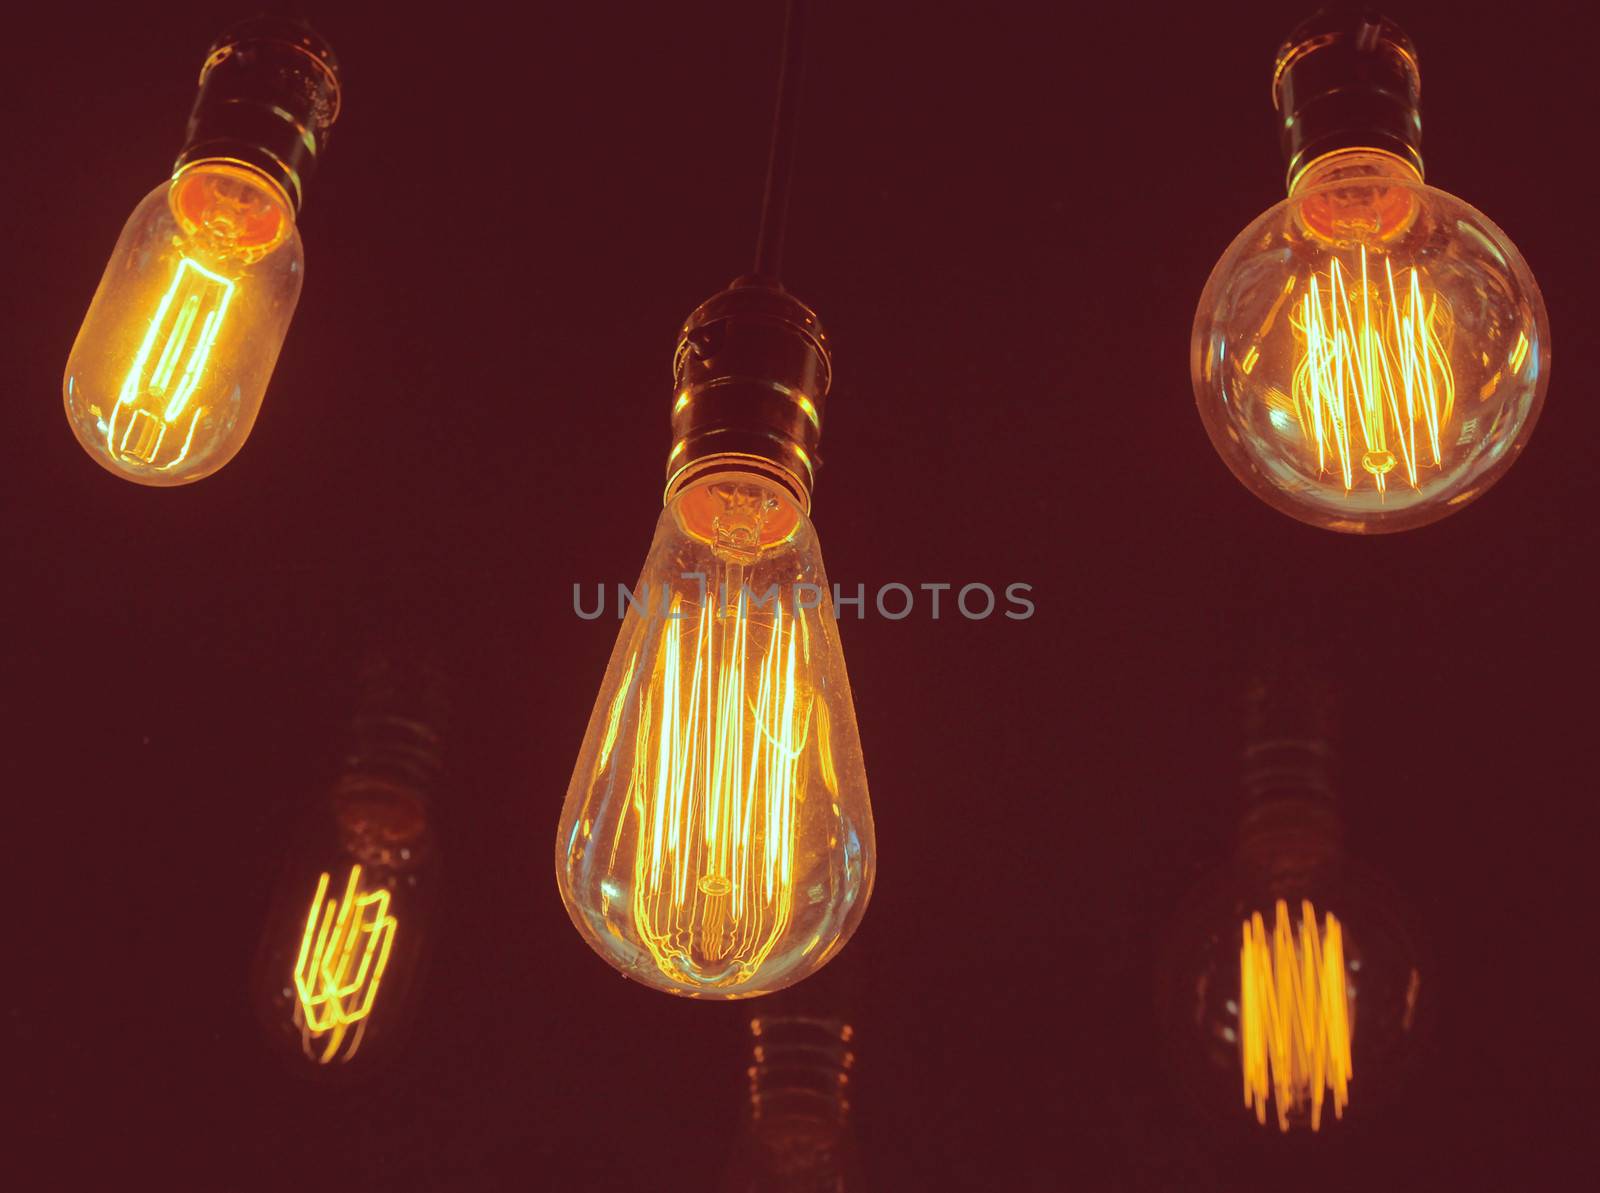 Vintage lighting decor with retro filter effect